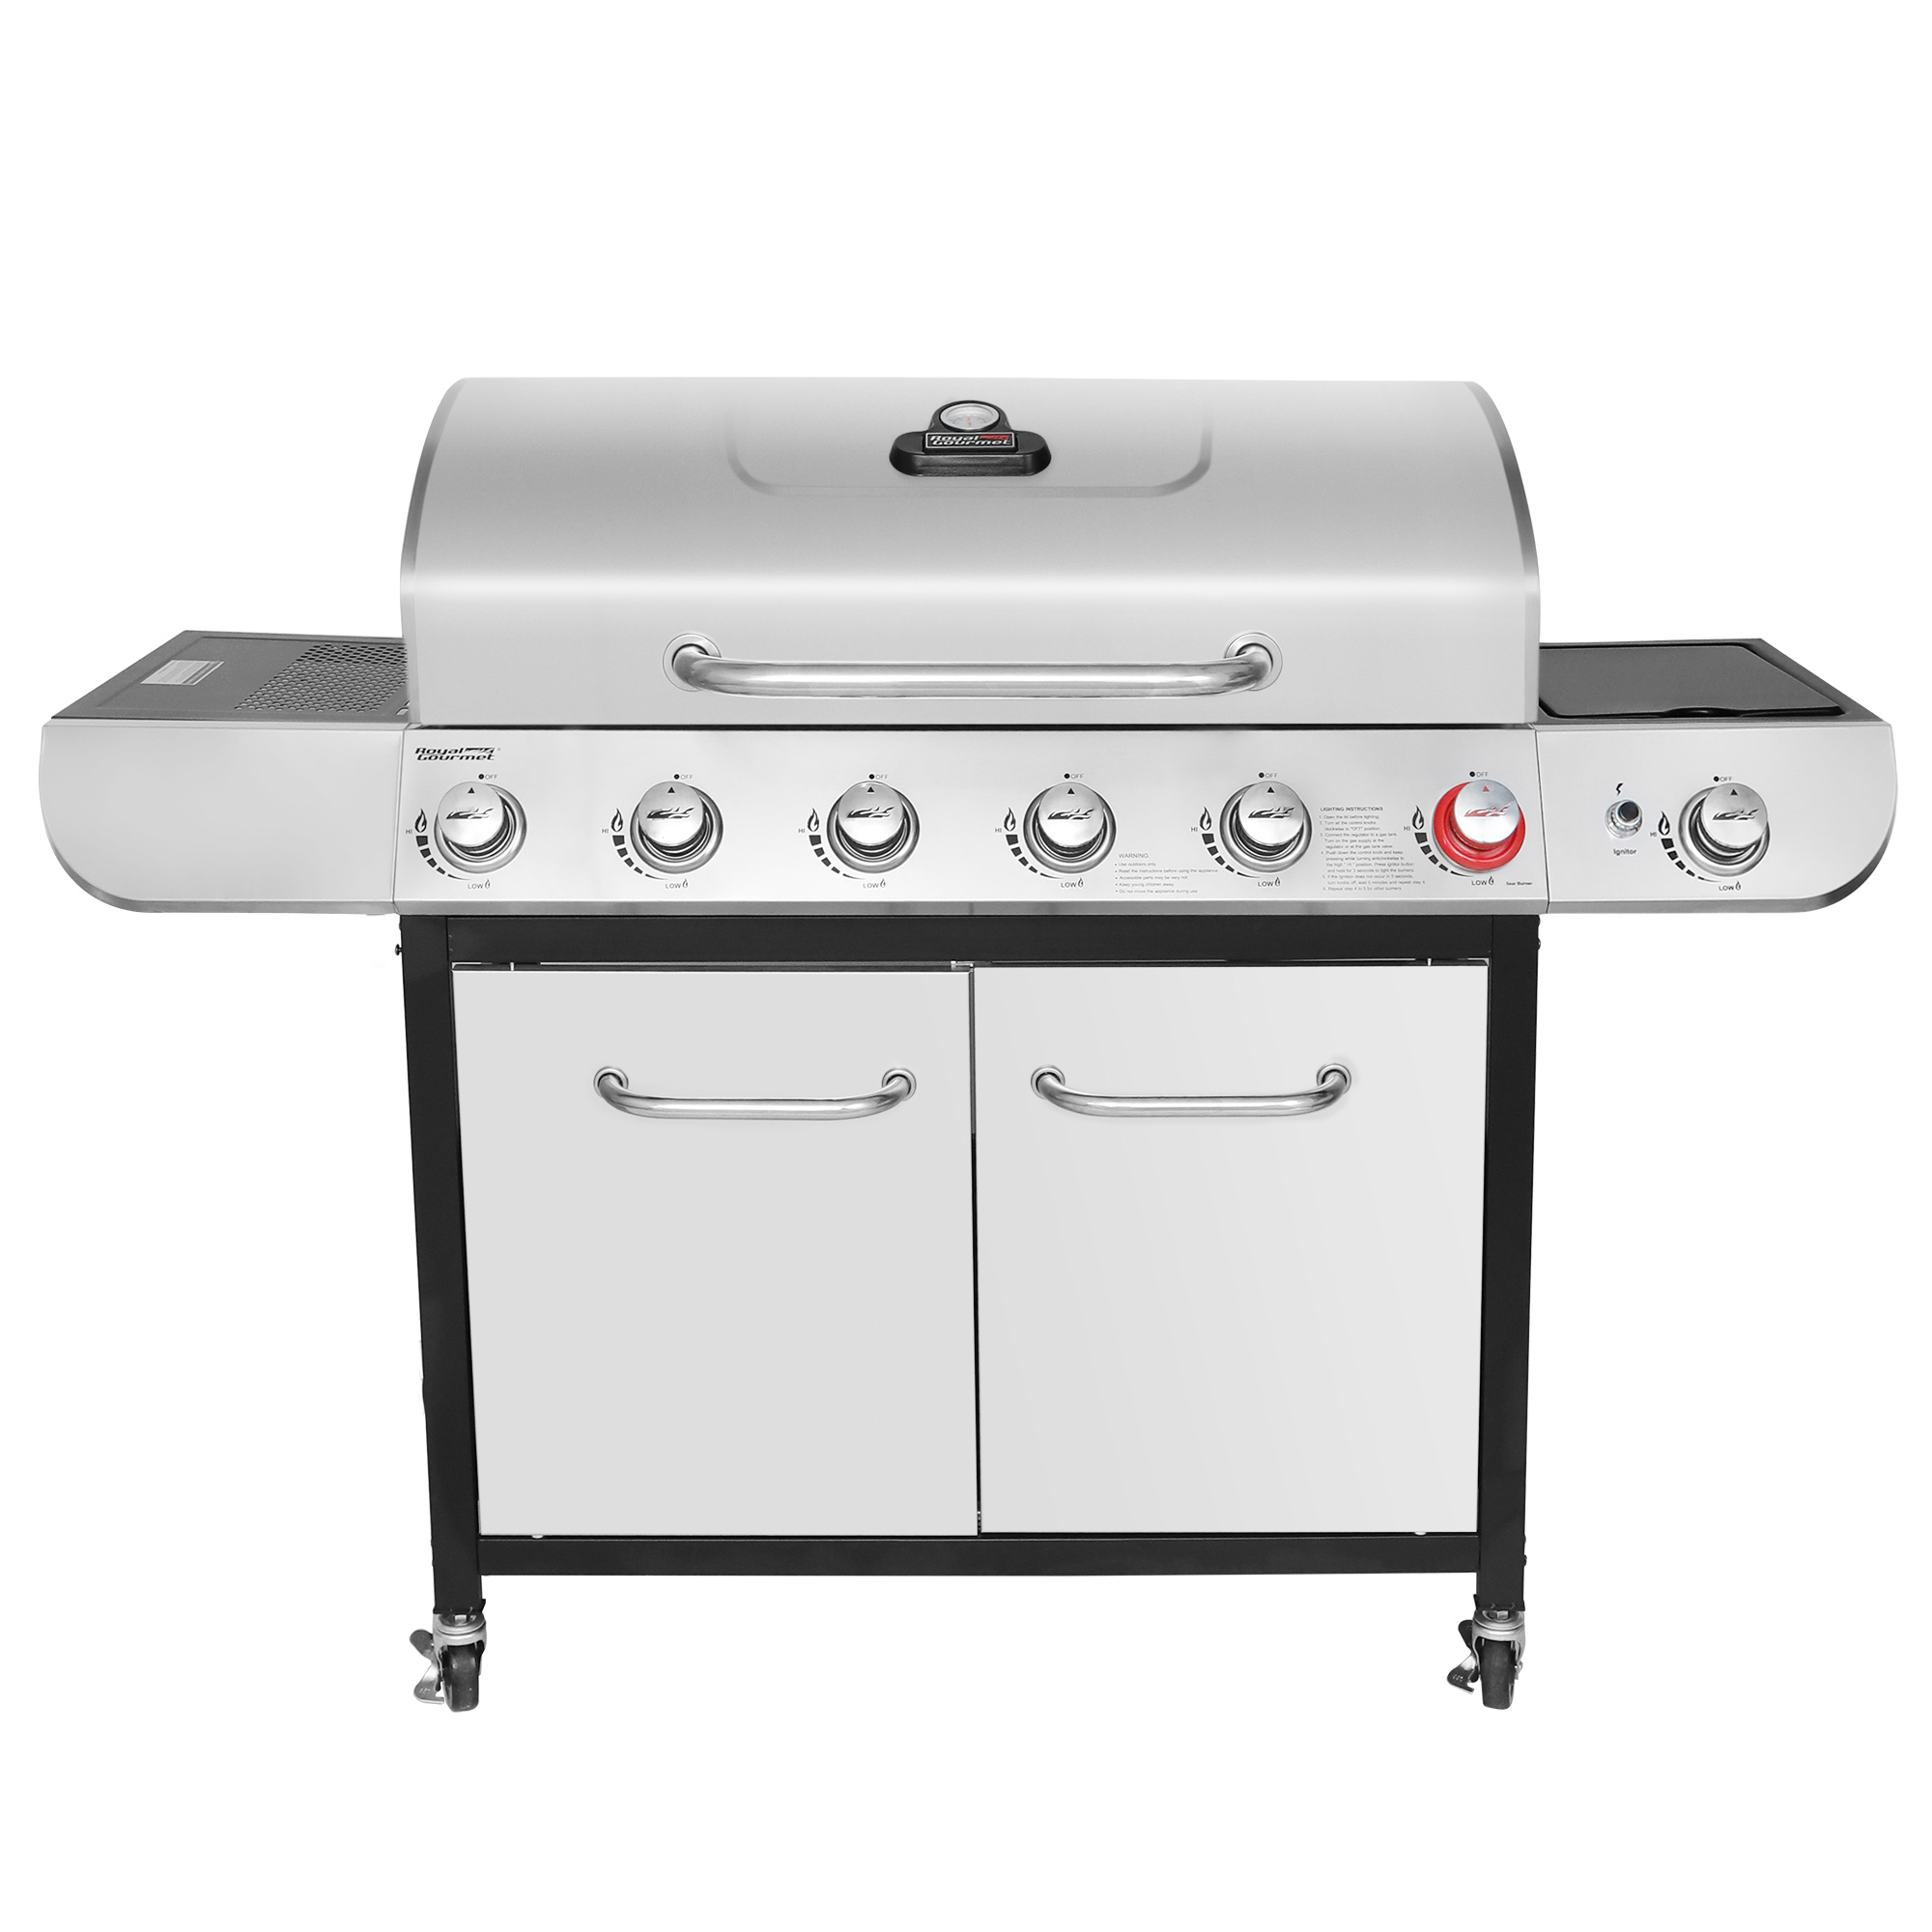 Royal Gourmet SG6002 Classic 6-Burner 71000-BTU LP Gas Grill with Sear Burner and Side Burner, Stainless Steel - image 1 of 8